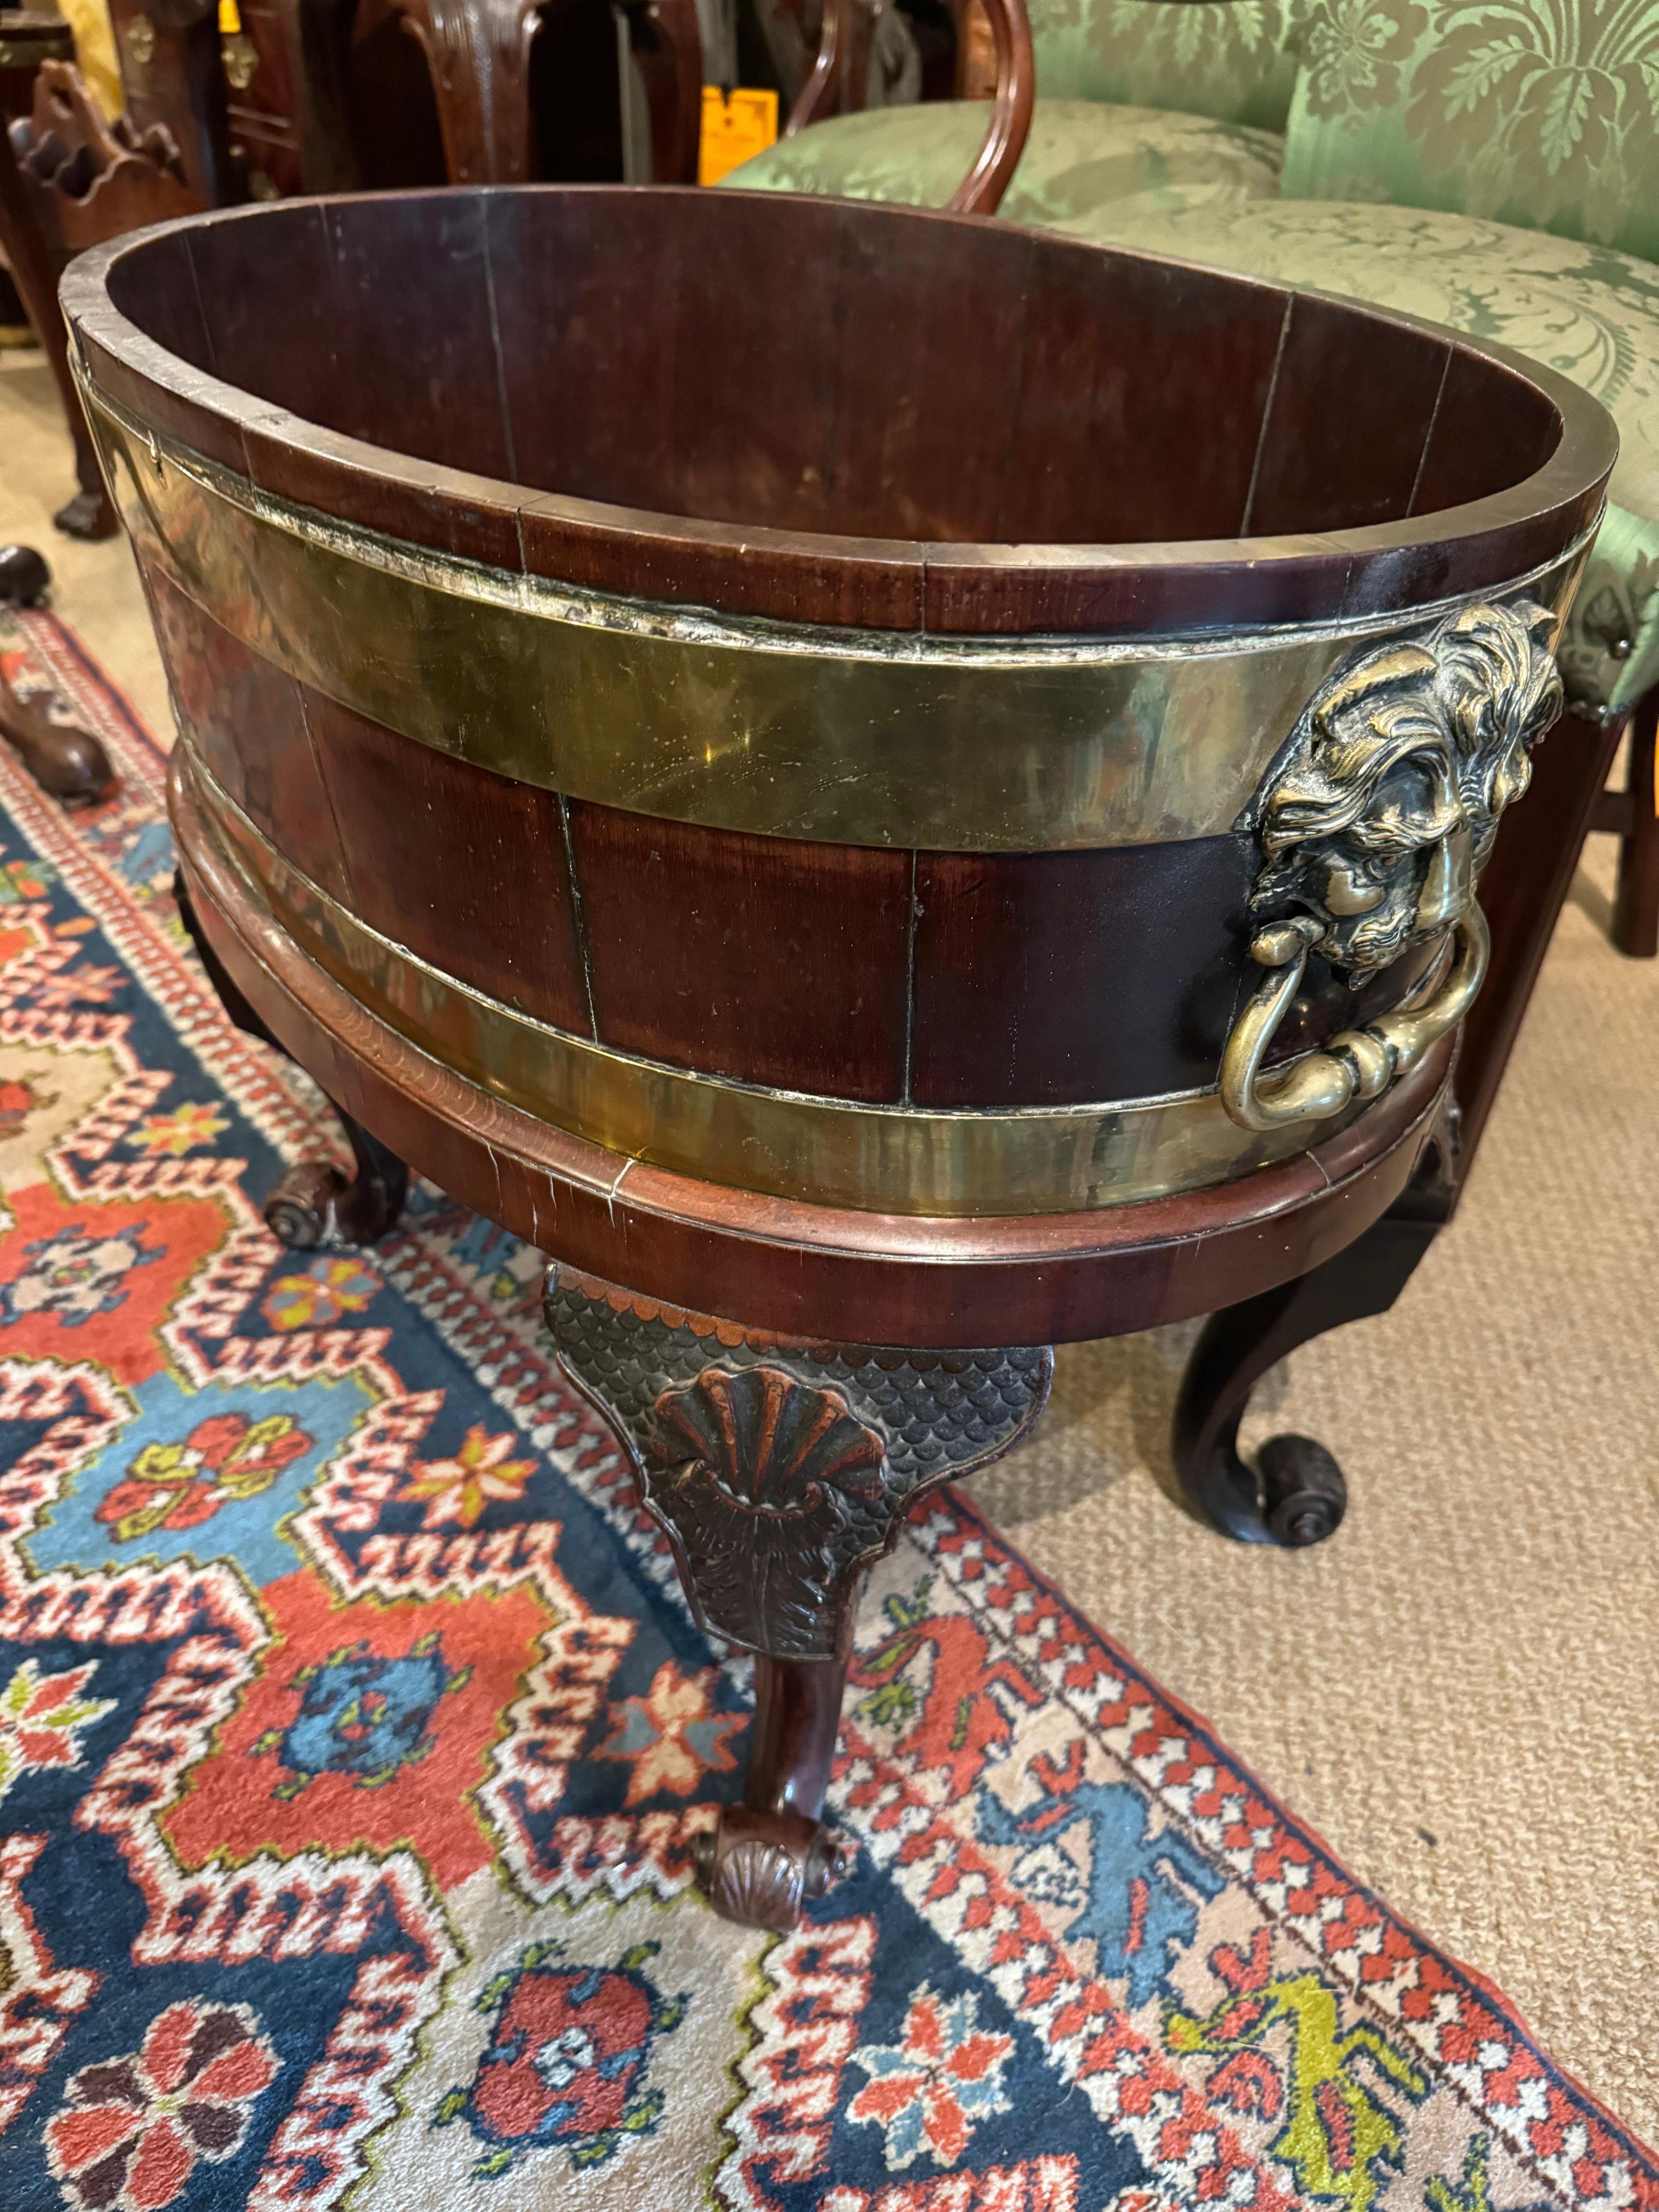 18th Century Irish Mahogany Brass-Bound Jardiniere In Excellent Condition For Sale In Dublin 8, IE